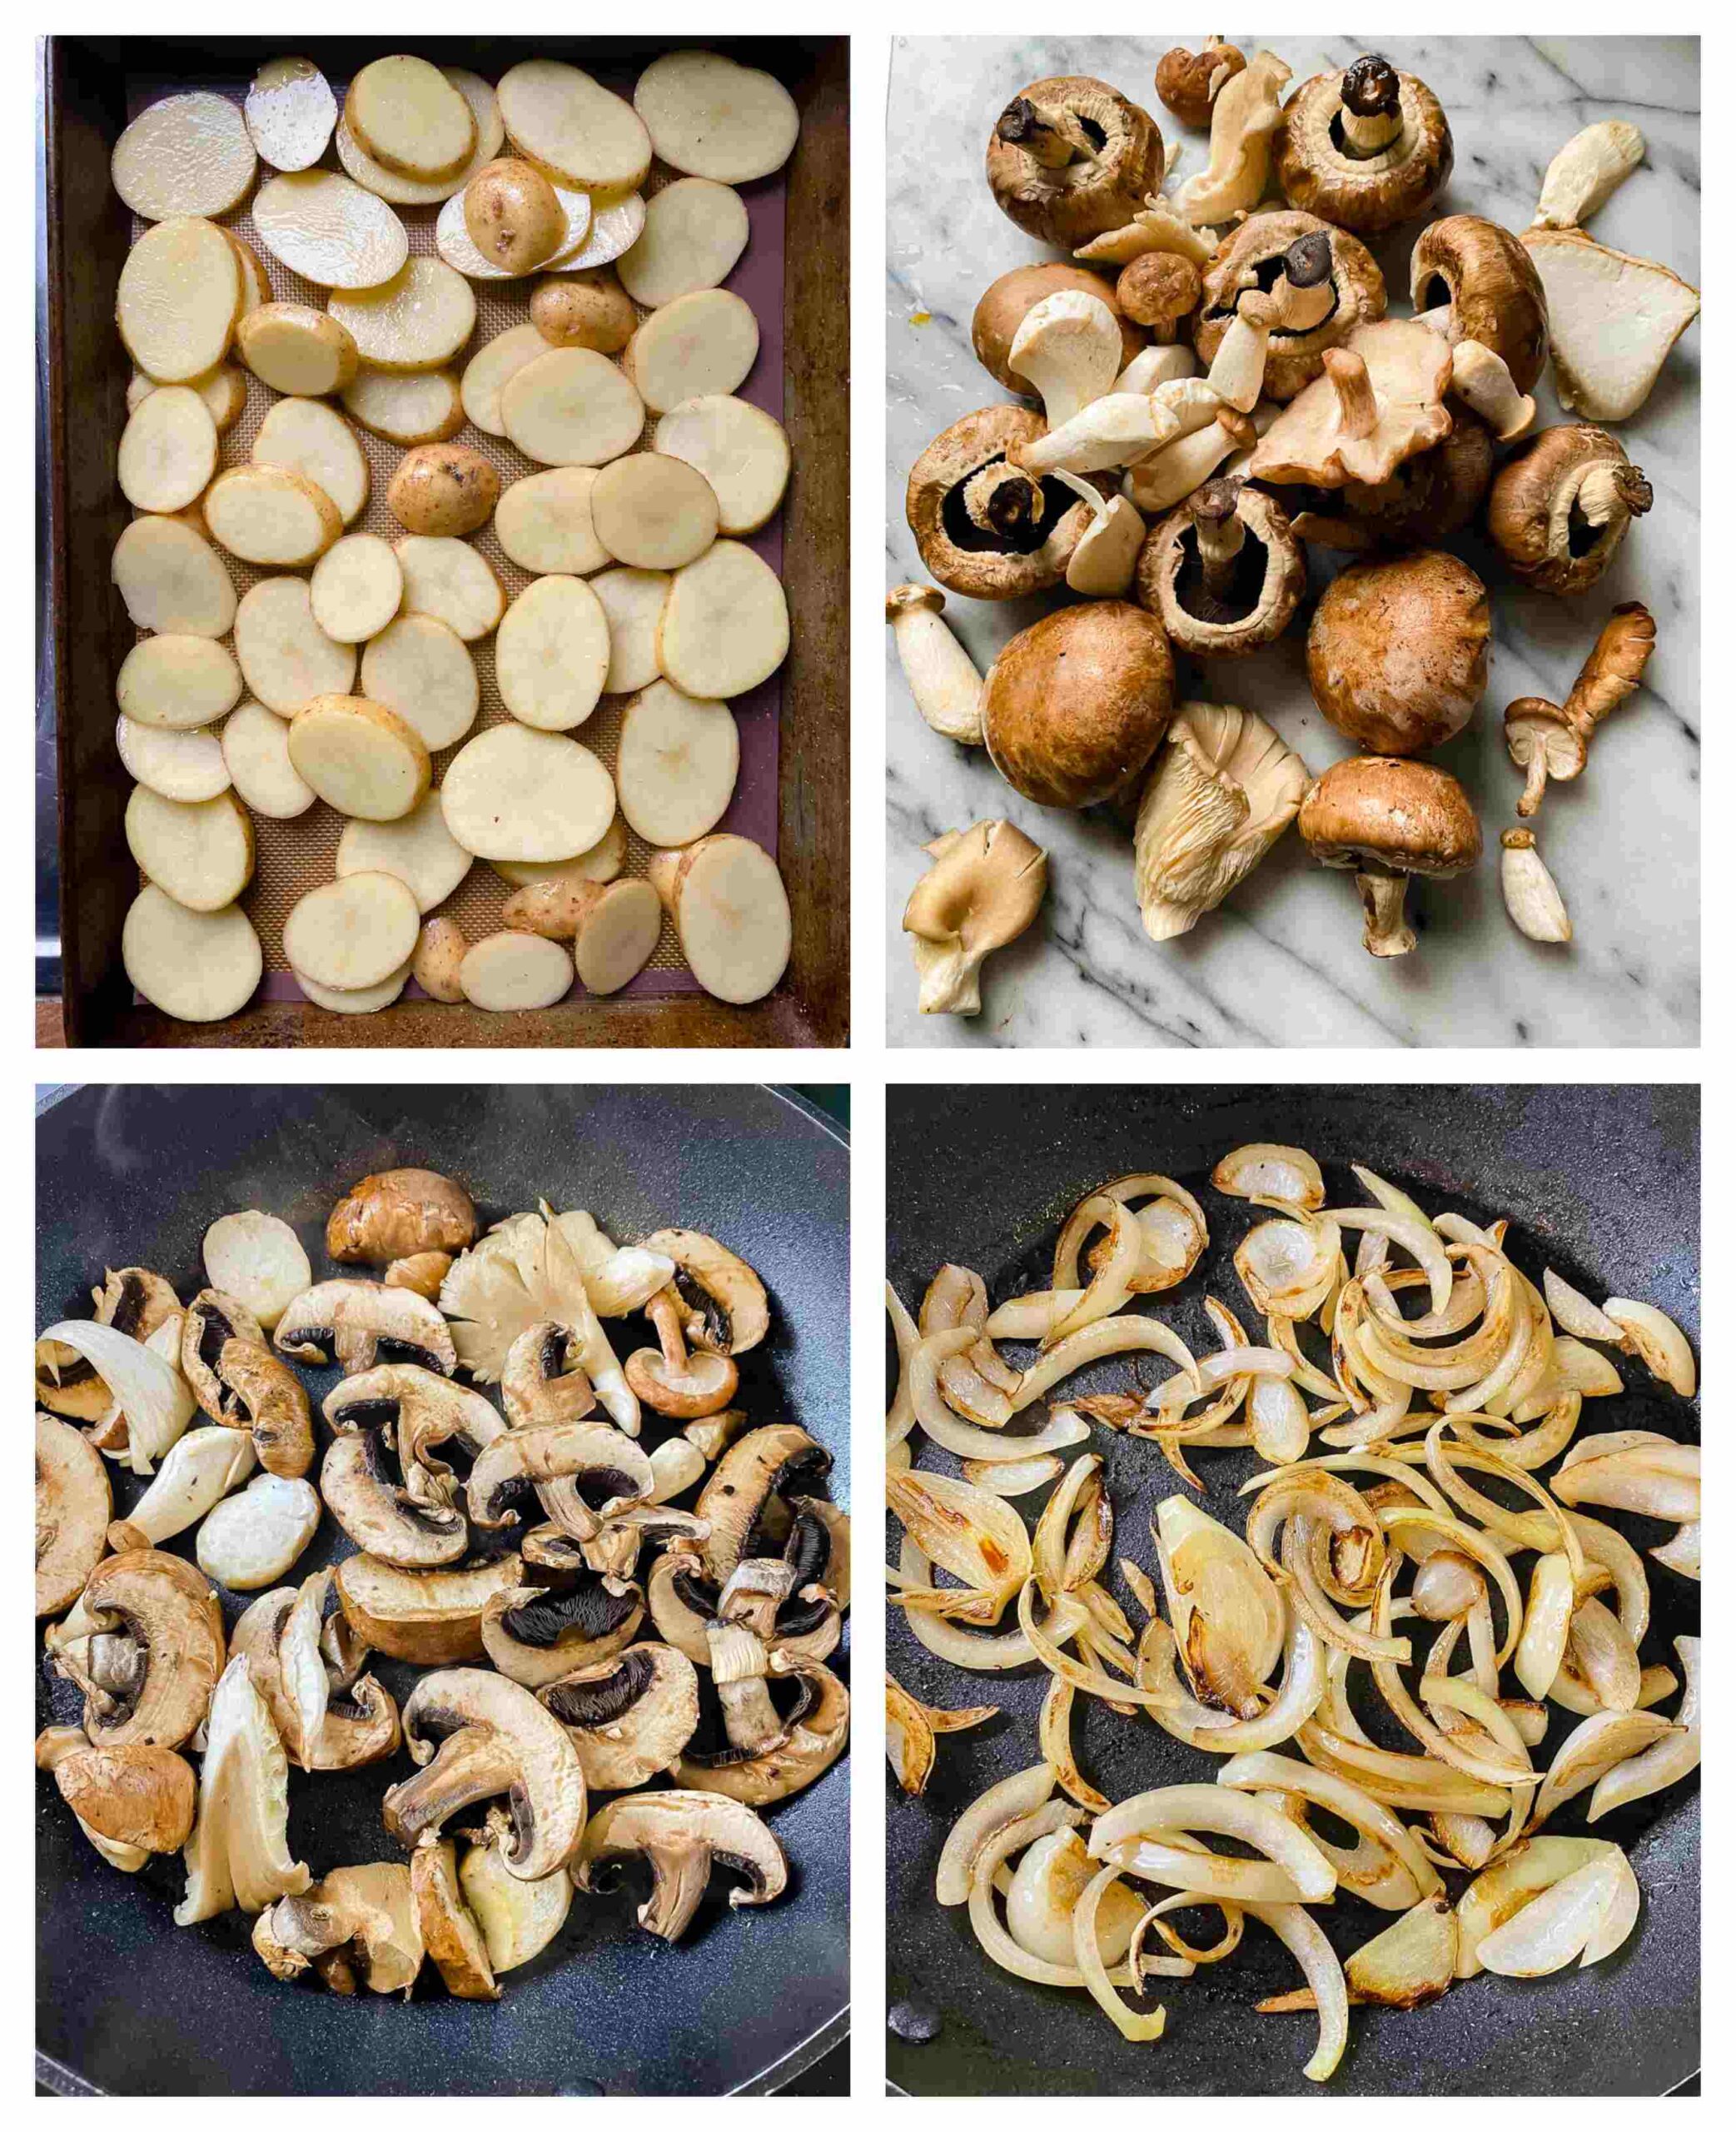 oven fried potatoes and mushrooms recipe process images